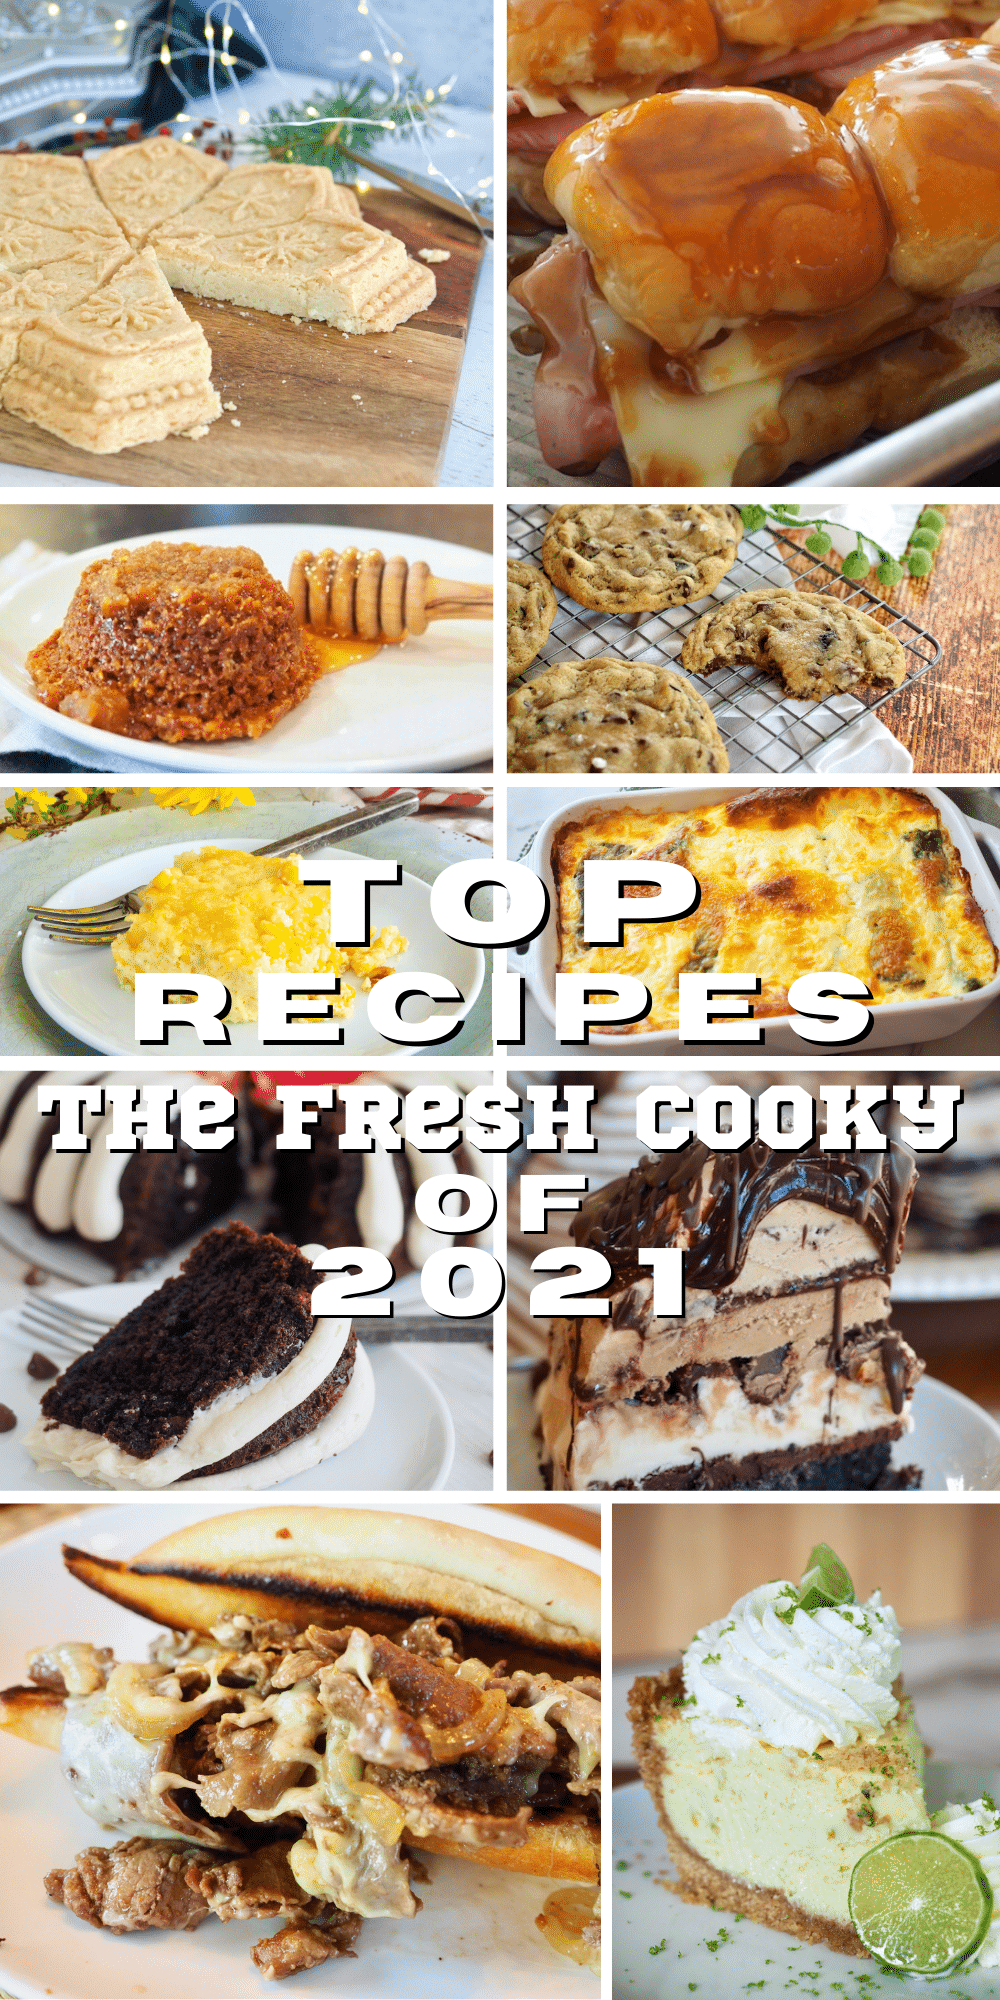 Pin with top 10 images of recipes from The Fresh Cooky for 2021.